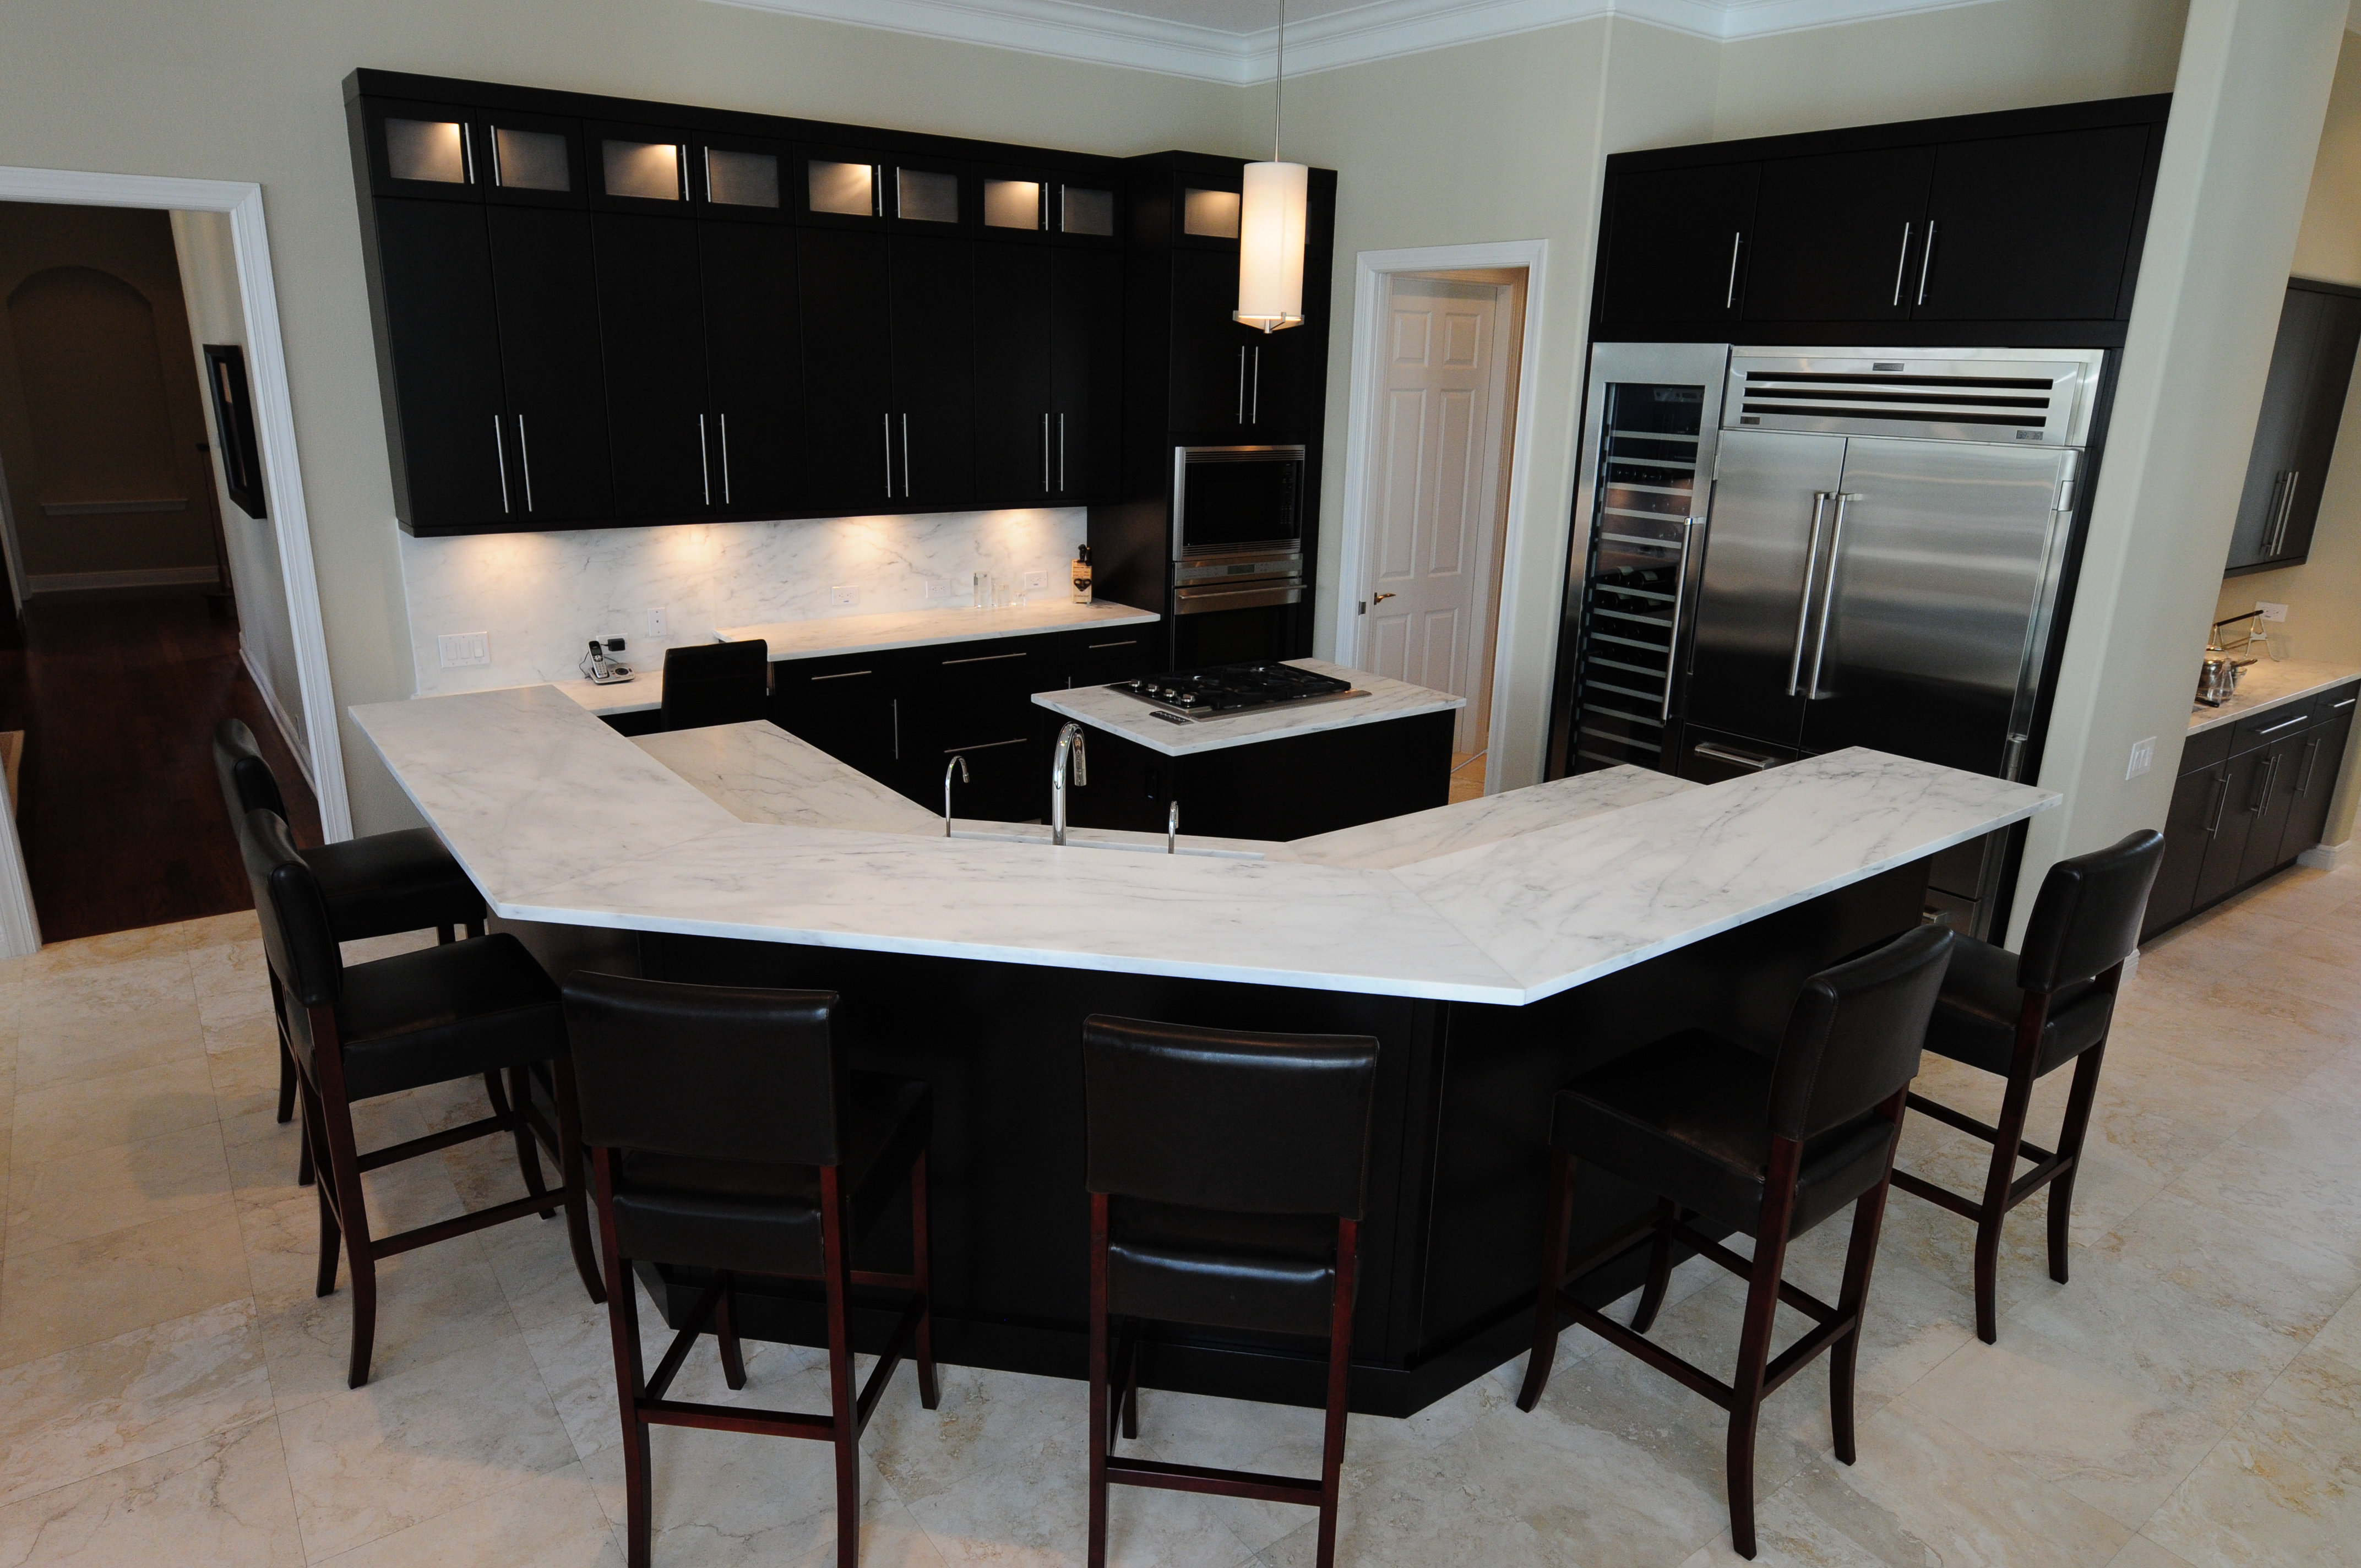 Contemporary Kitchen cabinetry